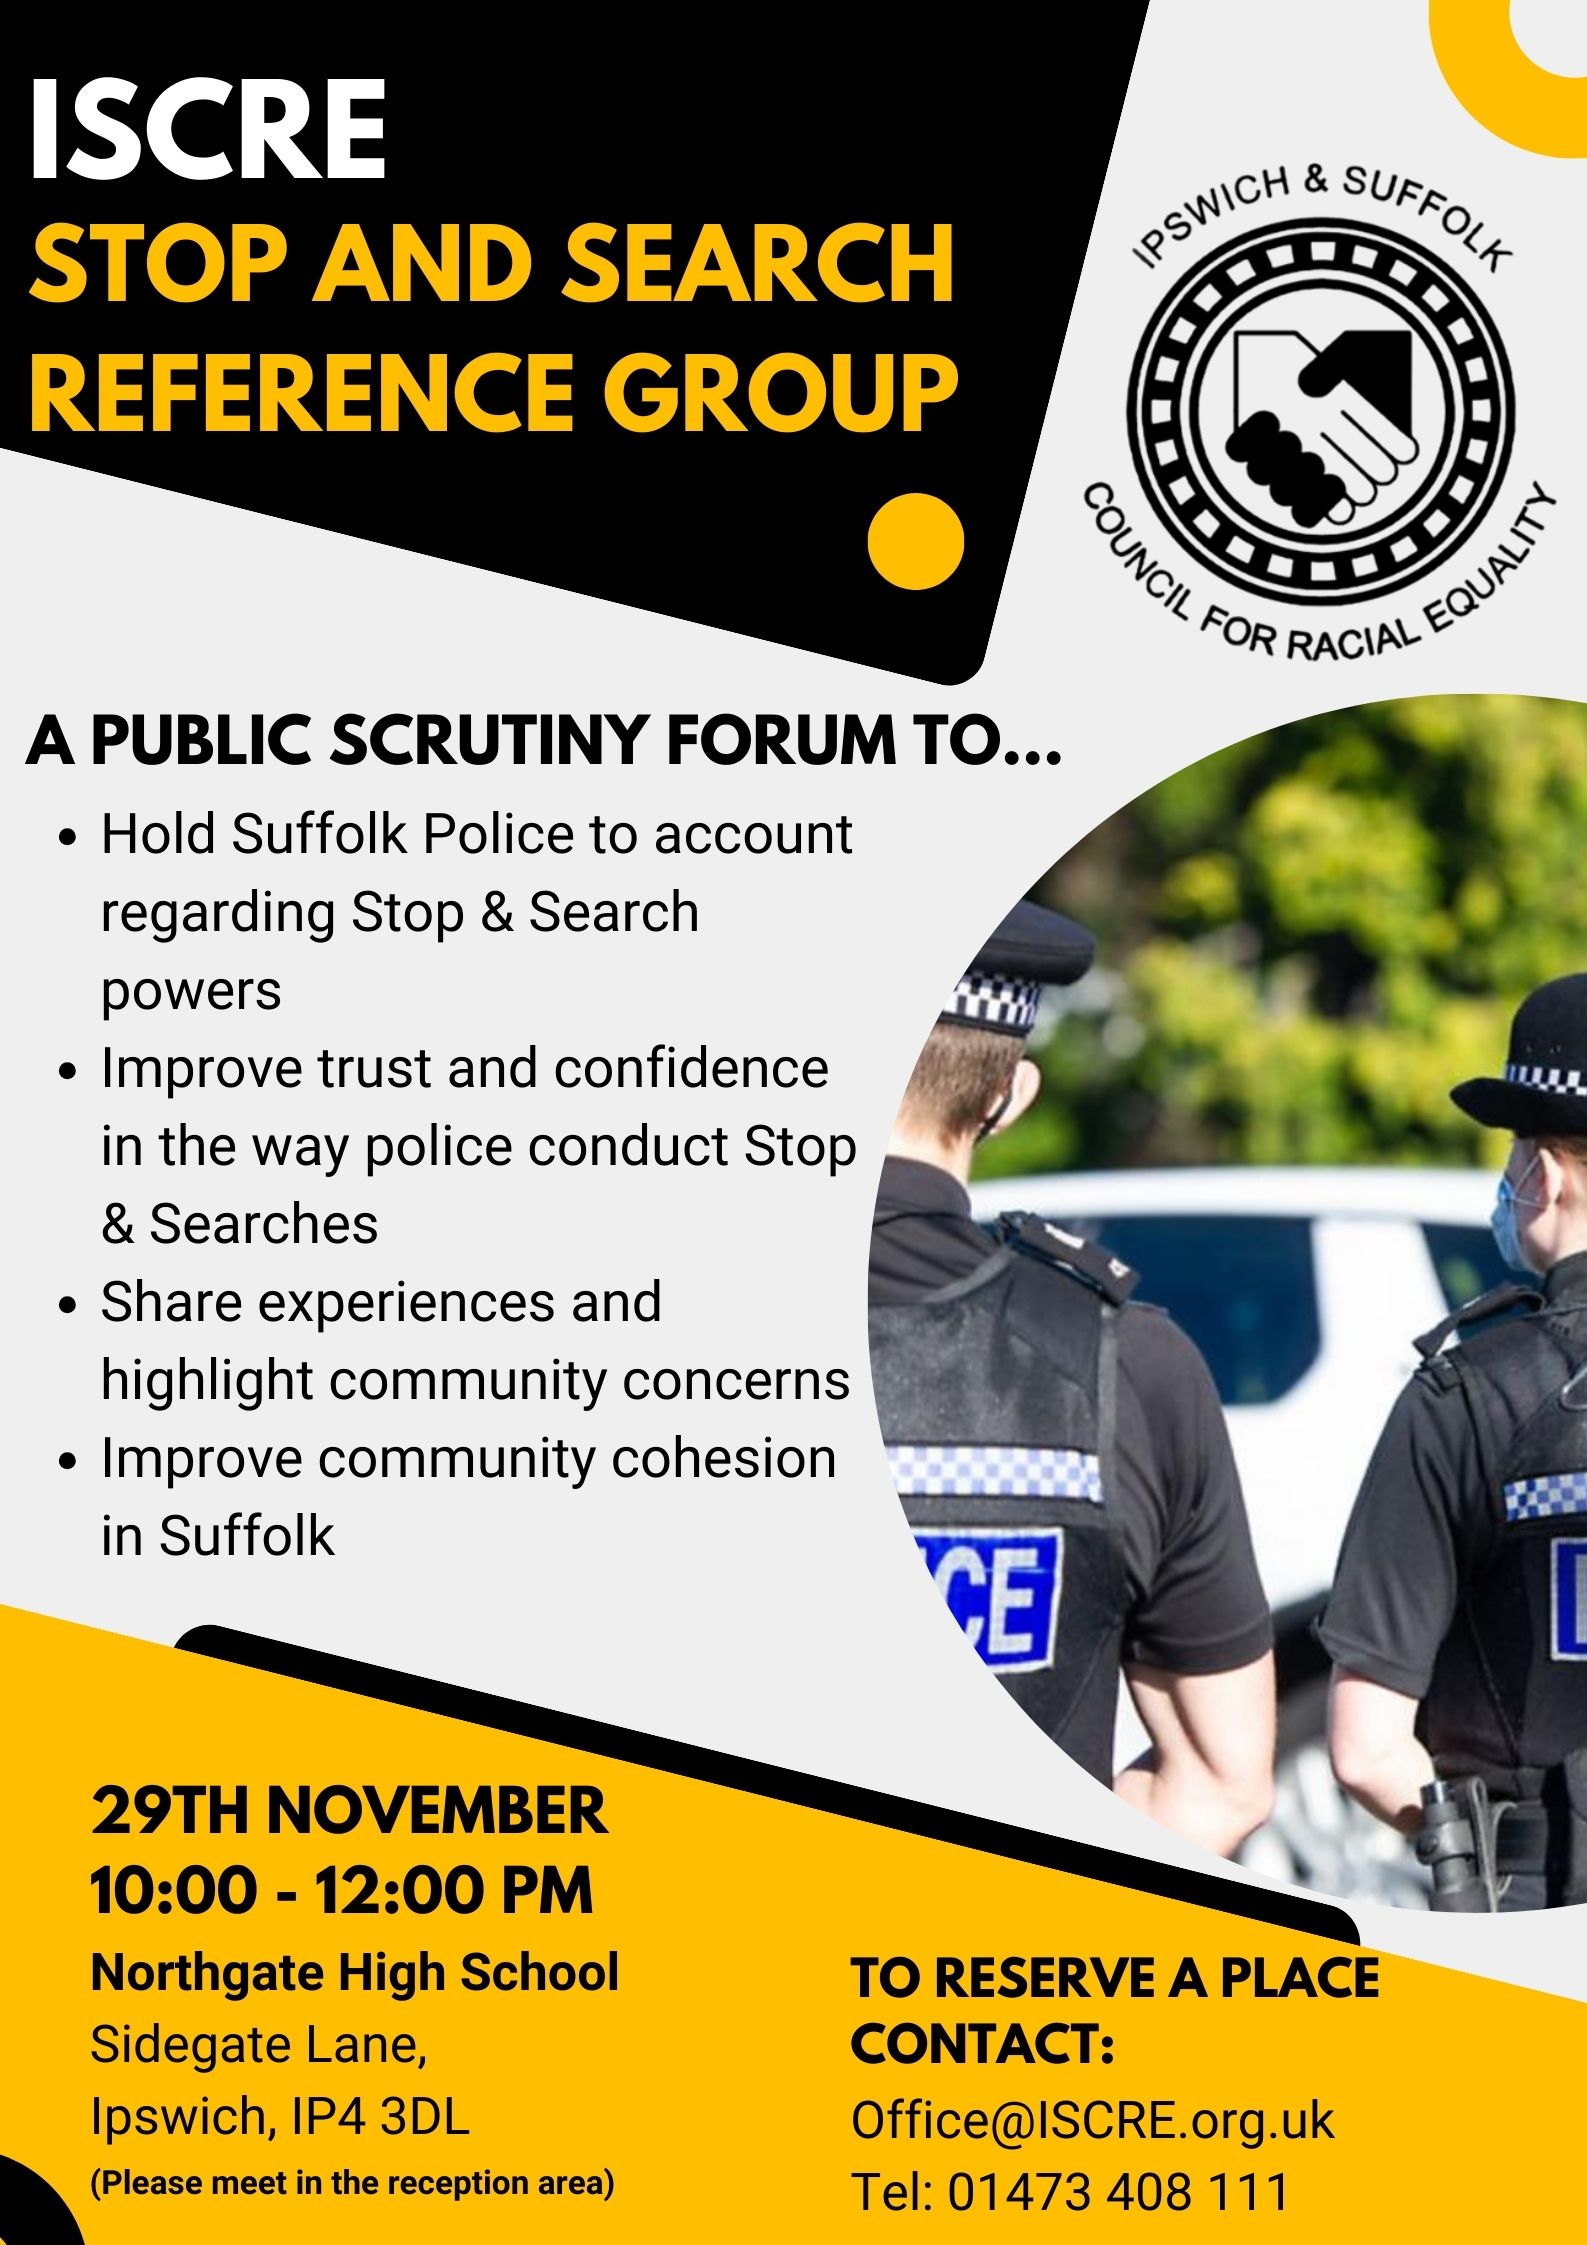 Stop and Search Reference Group 29th November